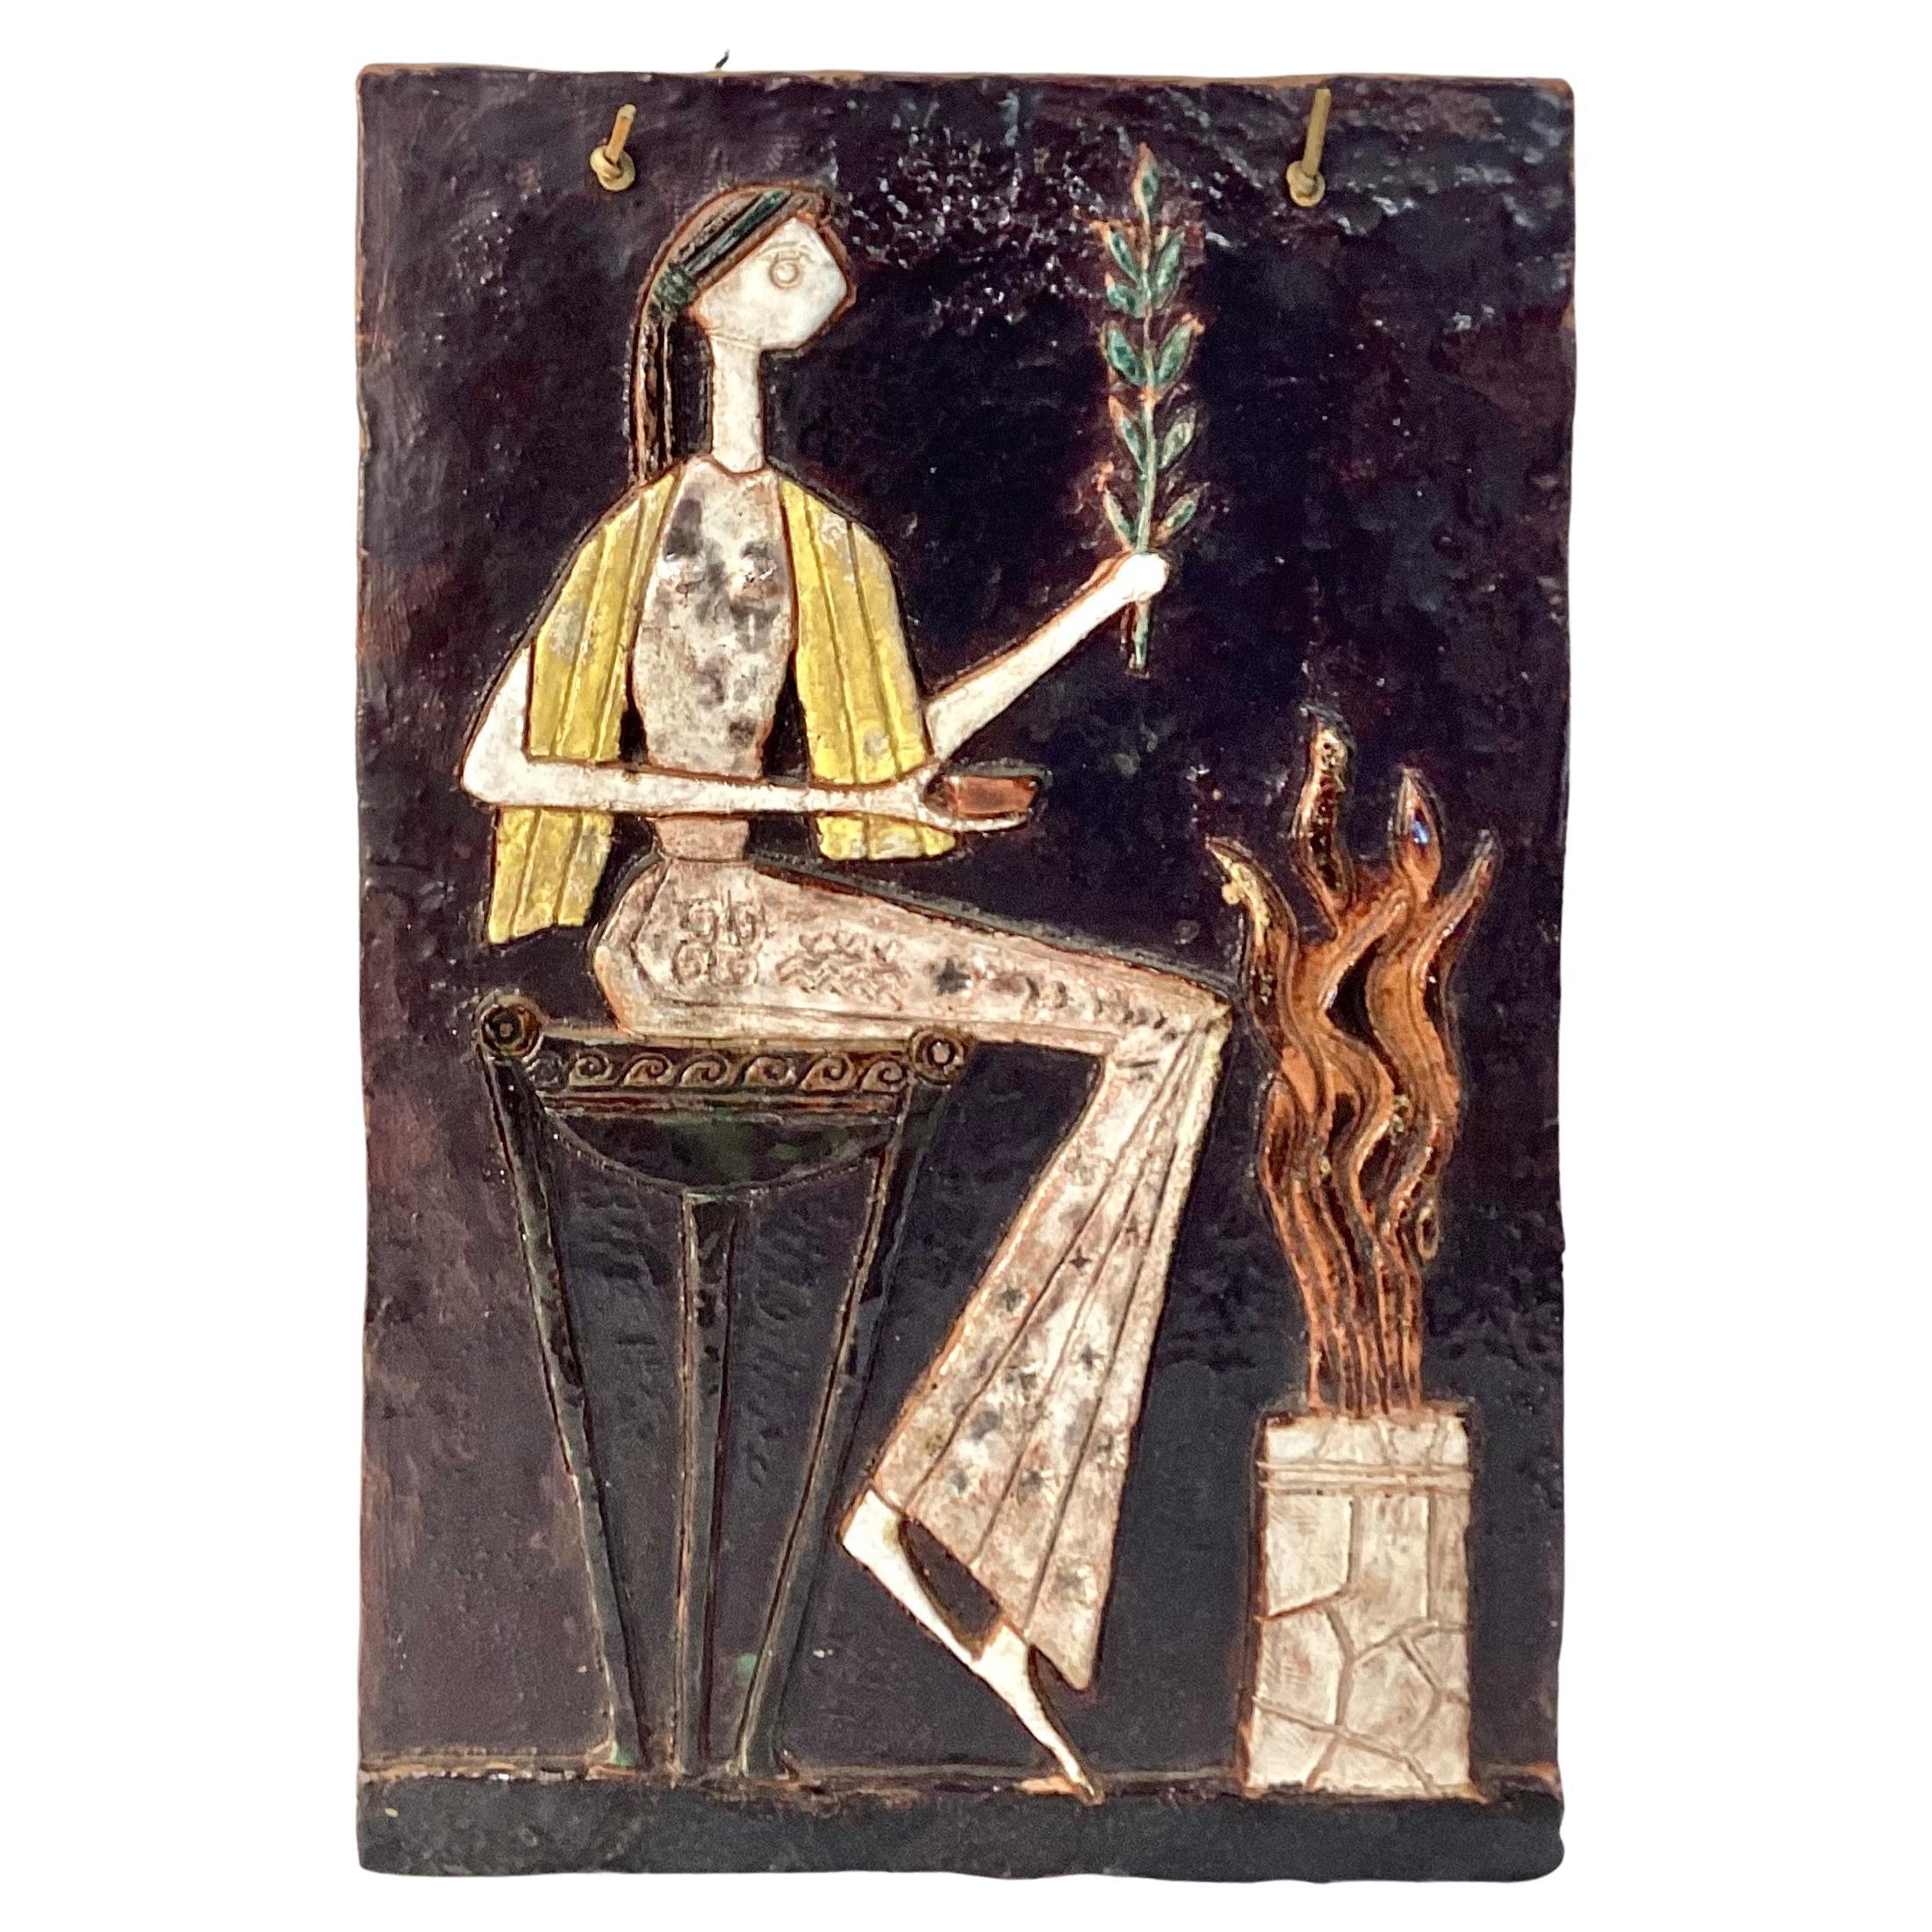 Oracle of Delphi Ceramic Wall Art For Sale